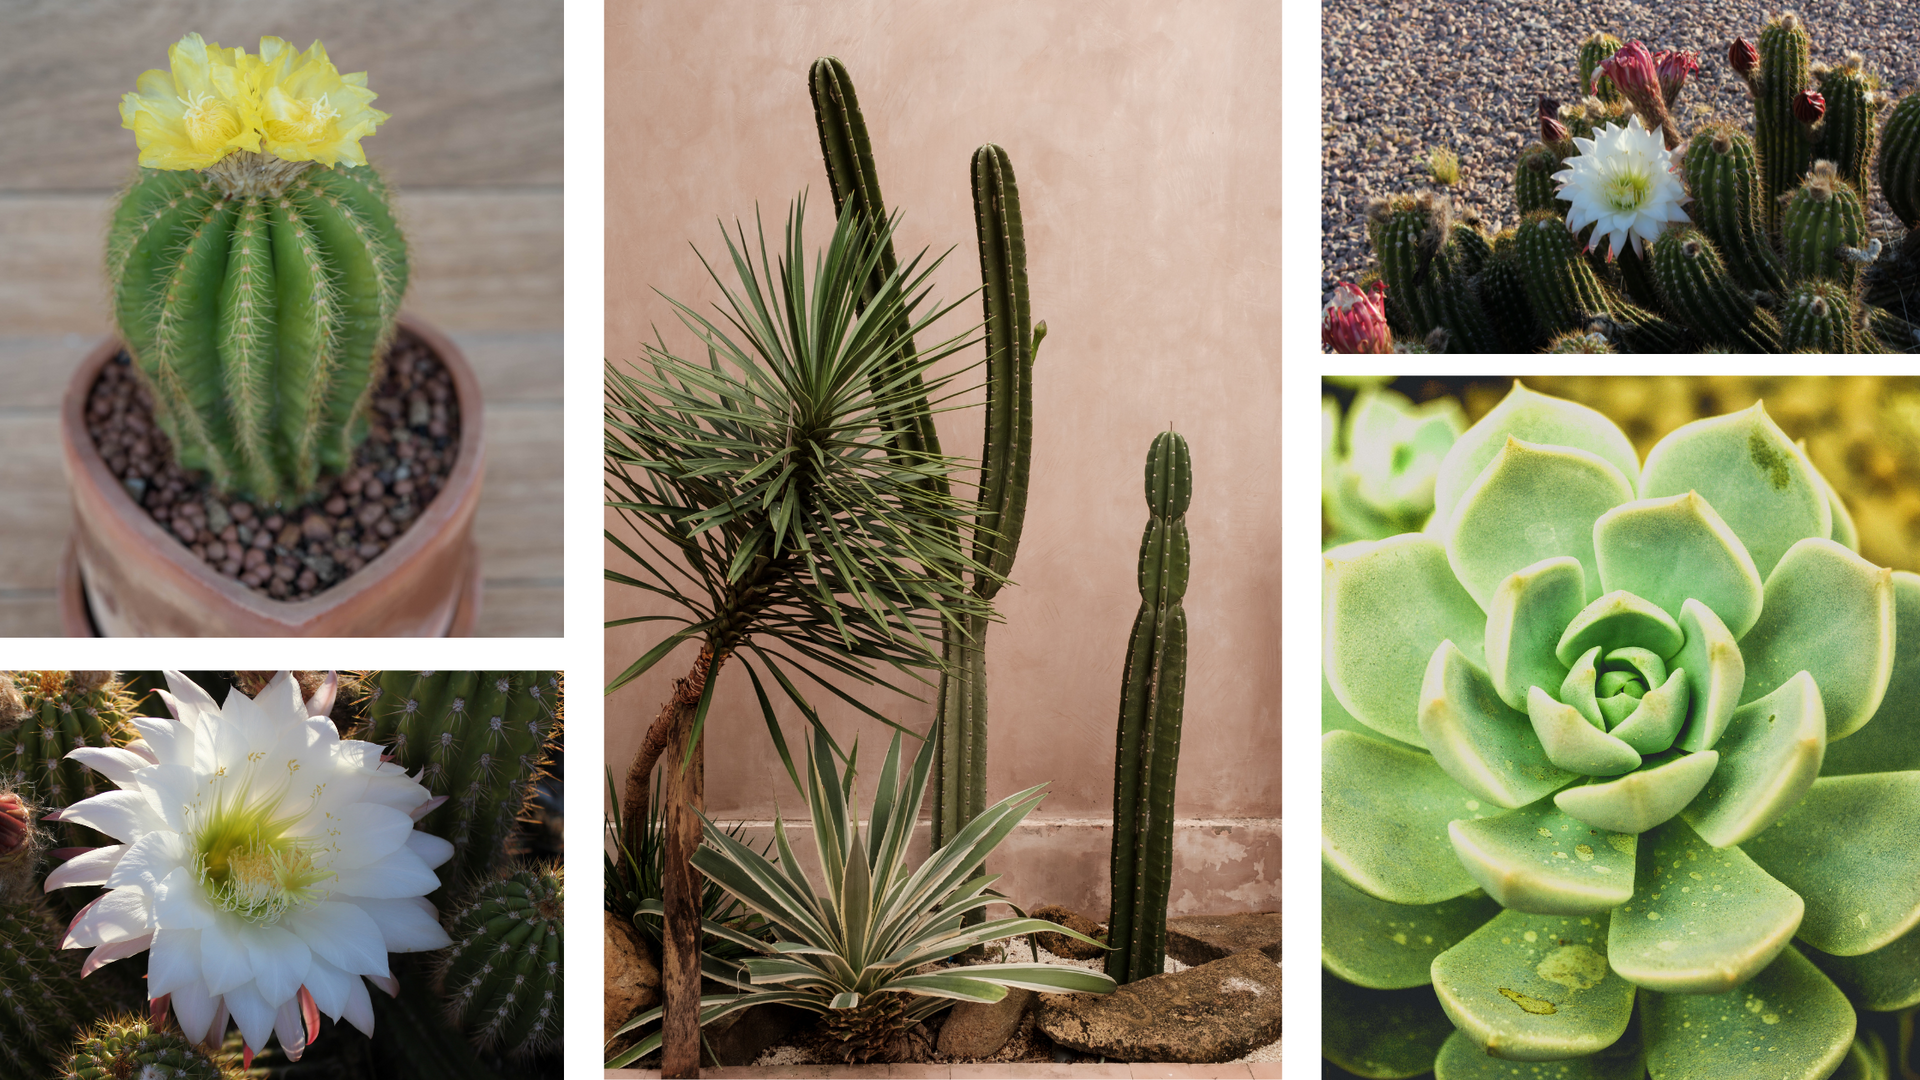 Sustainable and beautiful cacti in modern desert landscapes